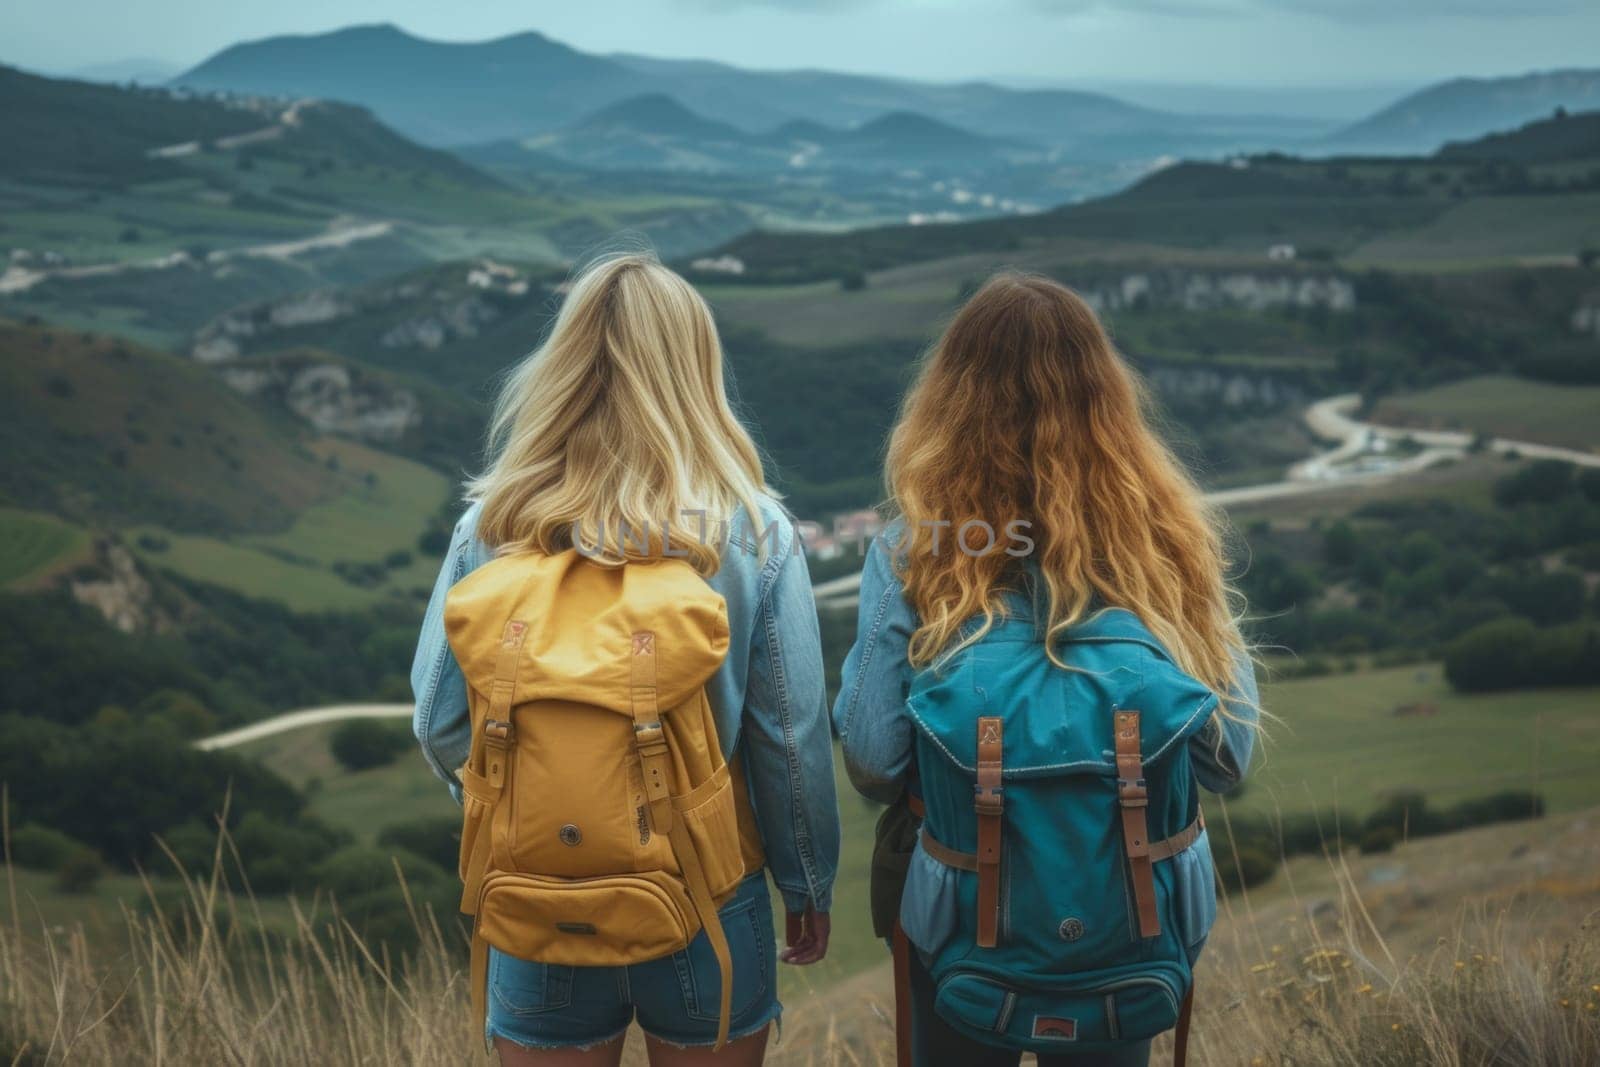 Rear view of two female friends backpackers looking at breathtaking views across the hills in the north of Spain.